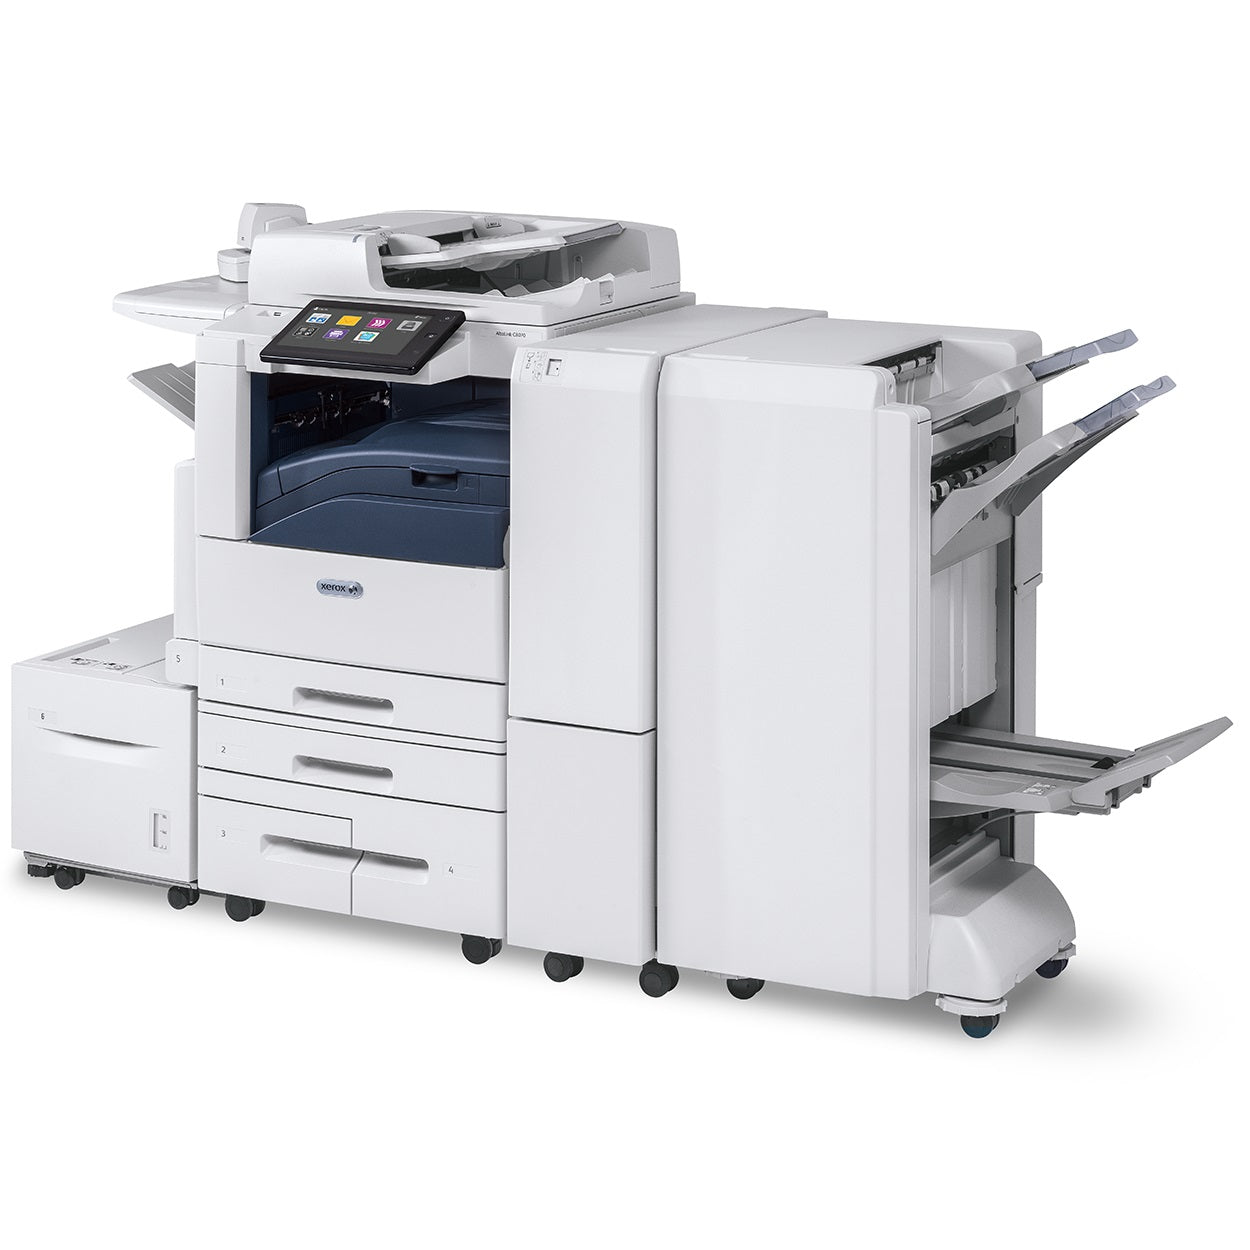 Xerox Altalink C8045 Color Laser Multifunctional Printer Copier Scanner With Support For Tabloid - Ideal For Mid To Large Workgroups